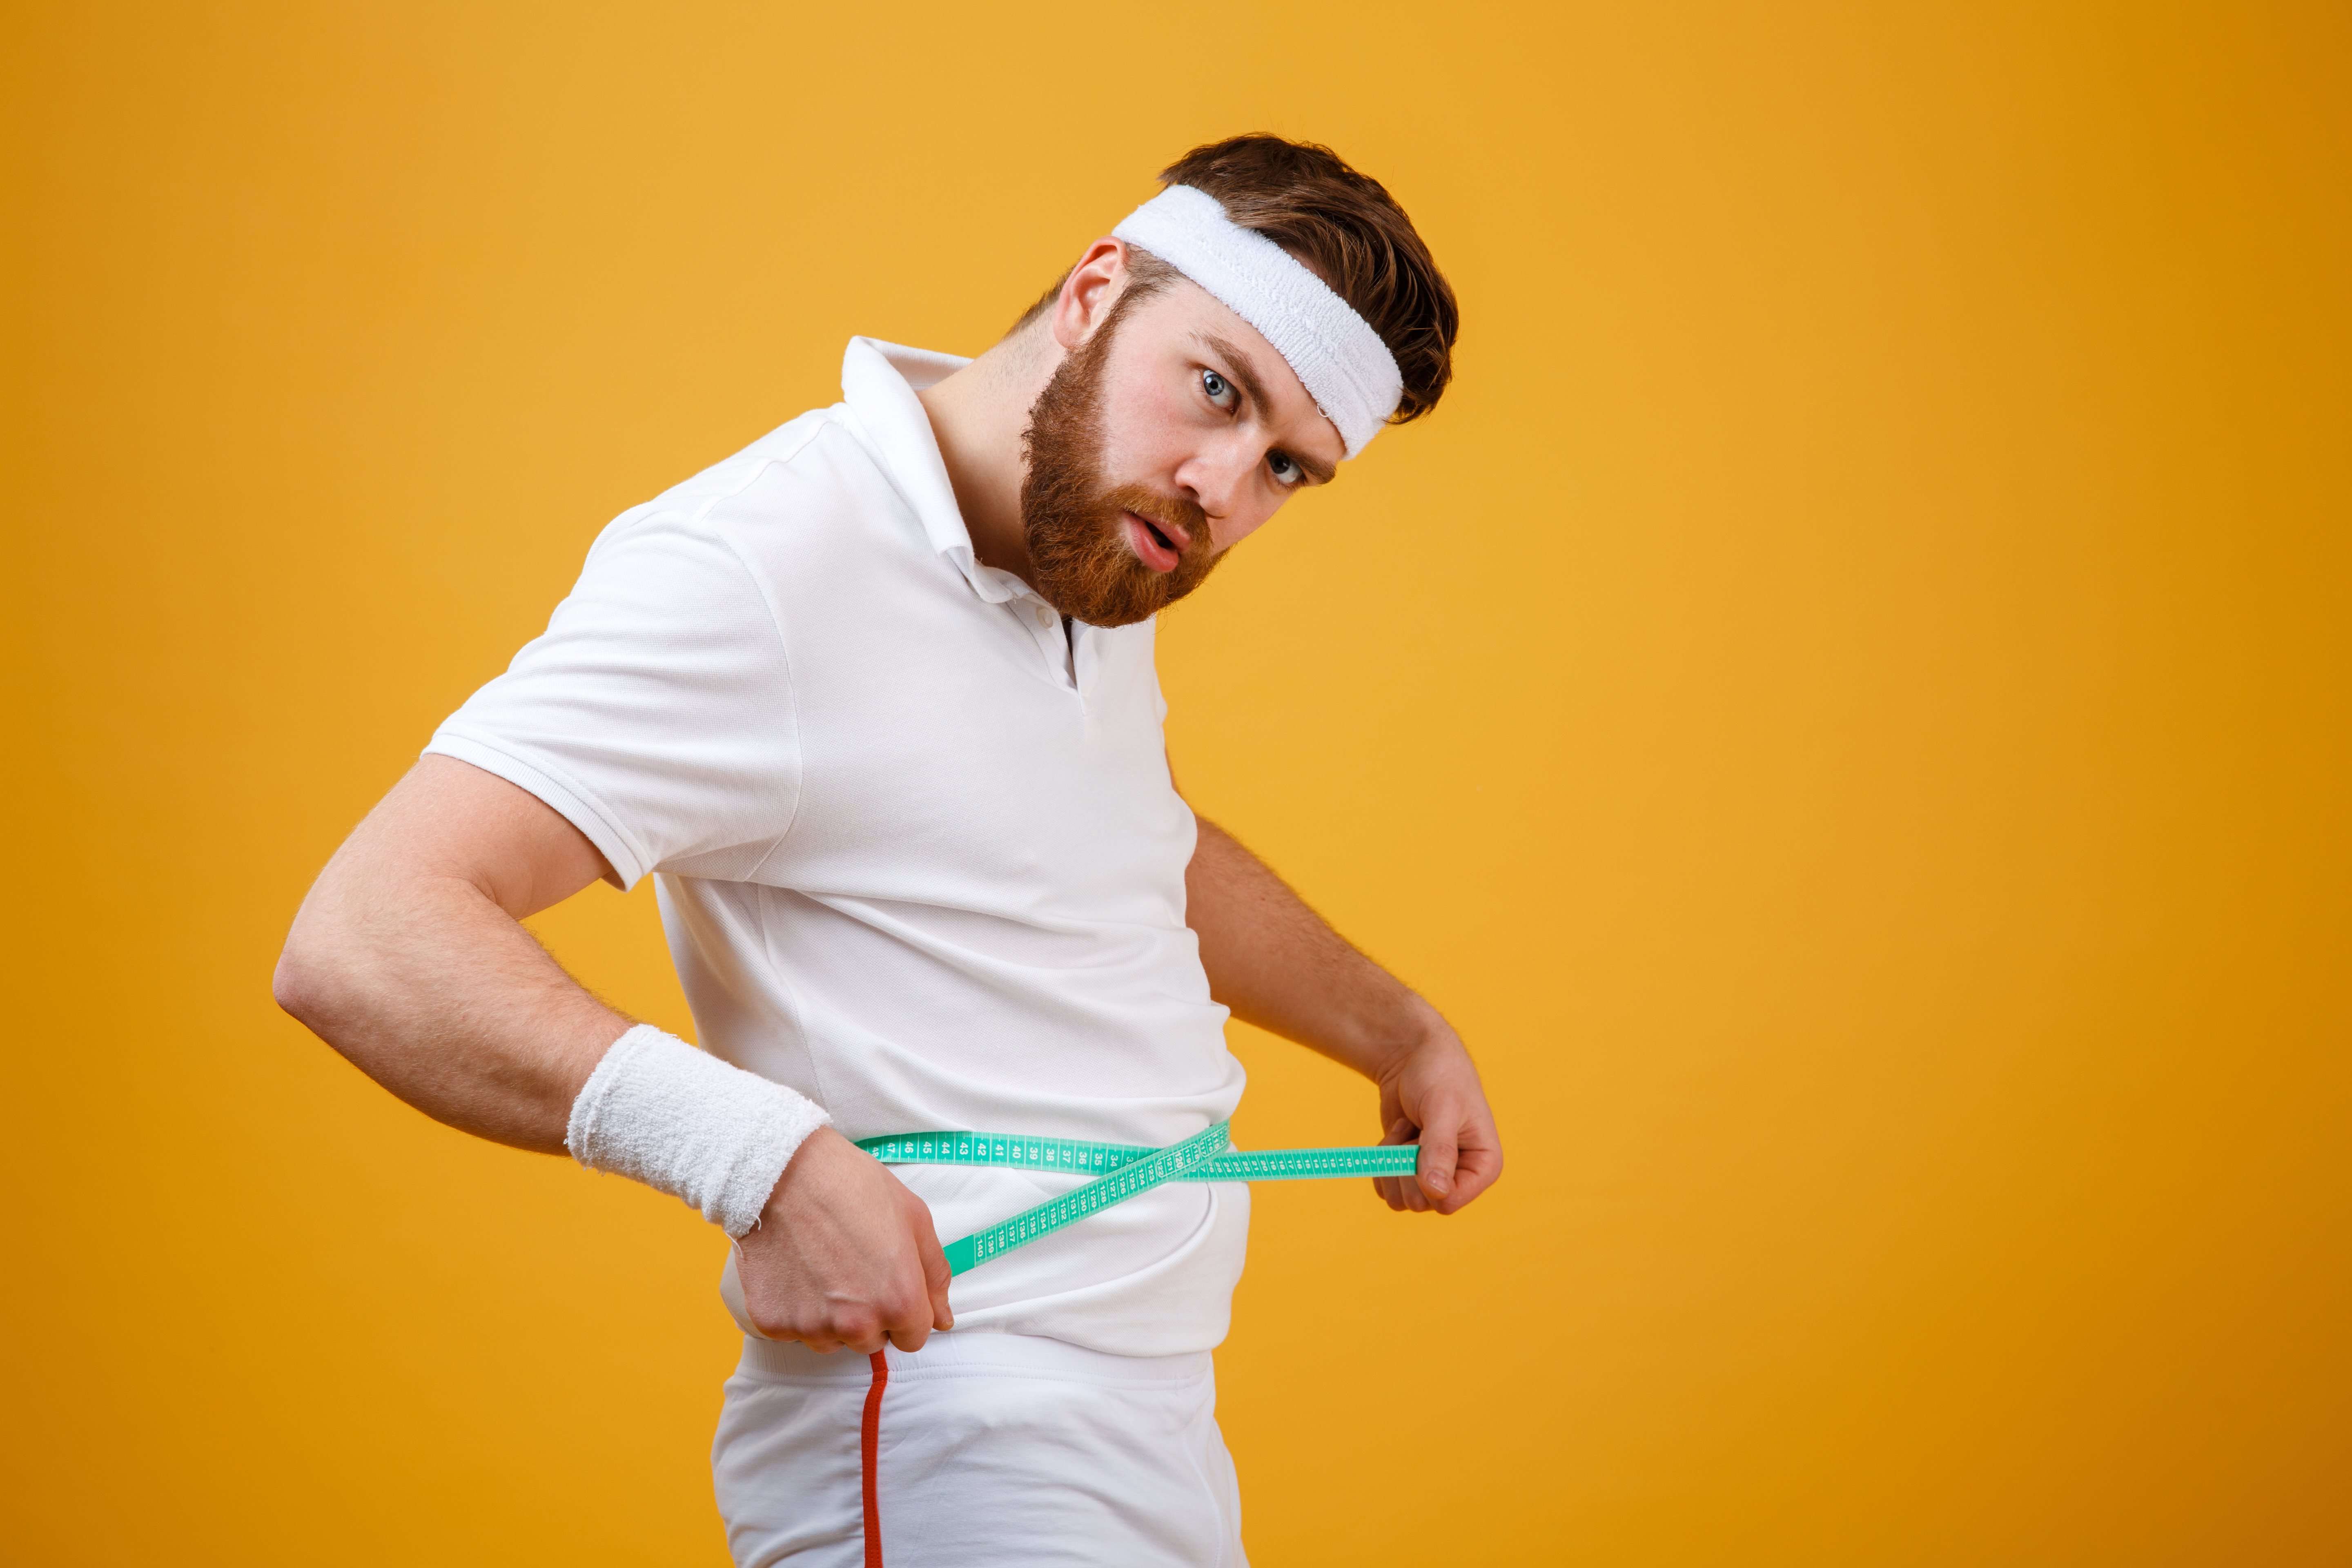 https://www.freepik.com/free-photo/portrait-sports-man-measuring-his-waist-with-tape_7855349.htm#query=diet&position=19&from_view=search&track=sph